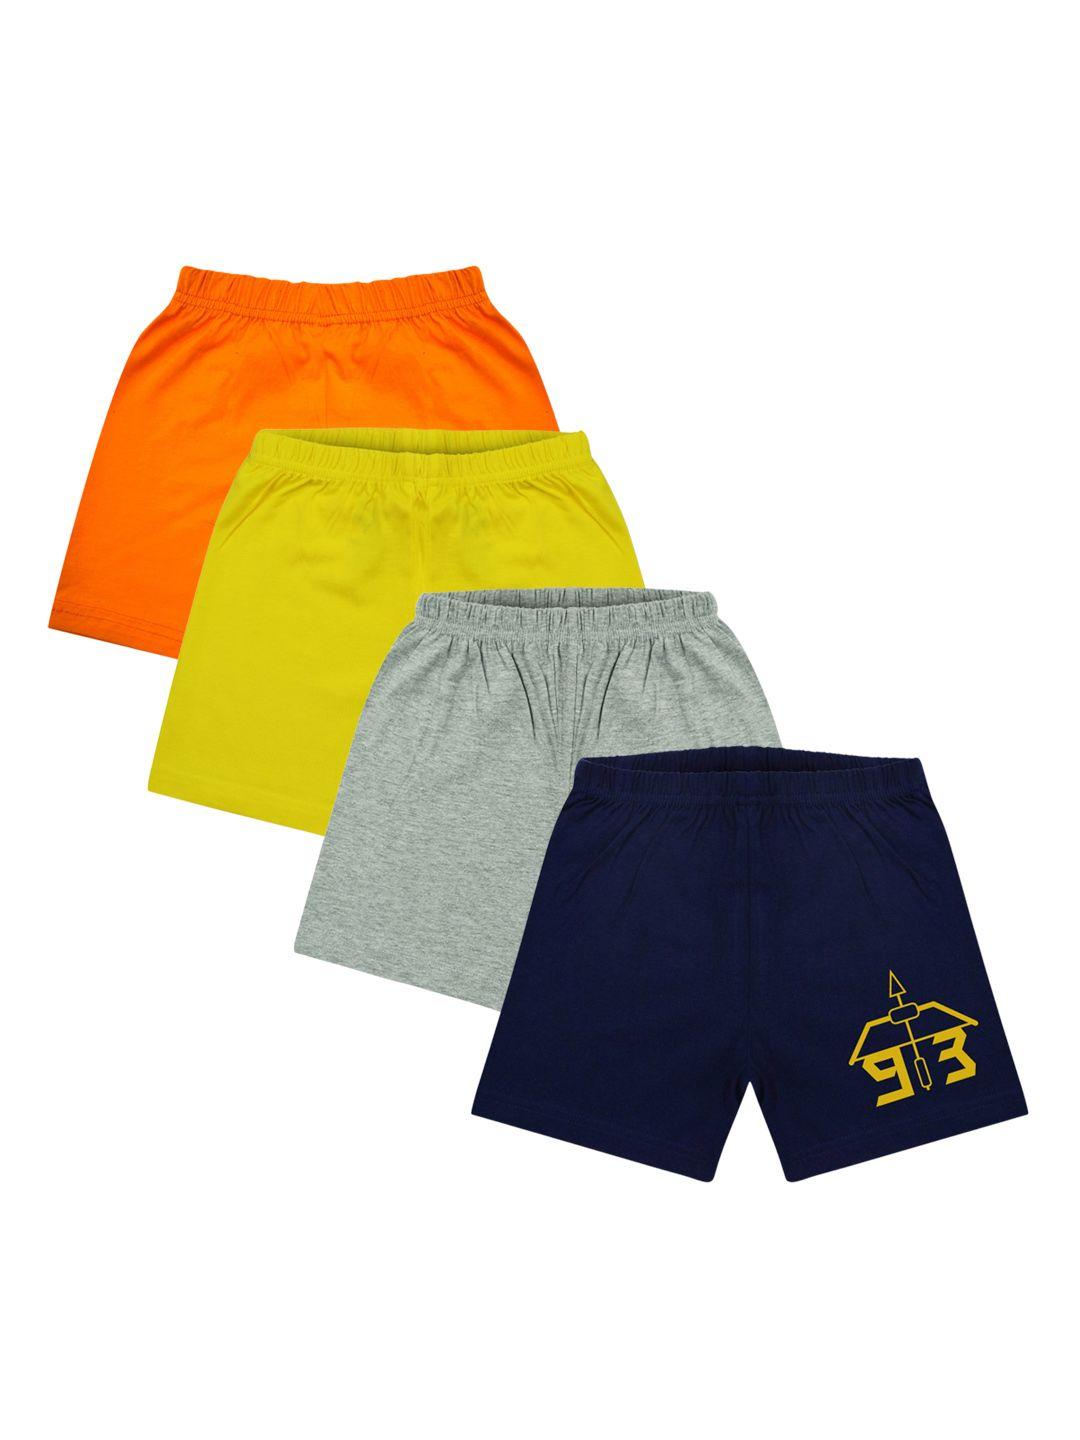 silver fang boys pack of 4 cotton shorts